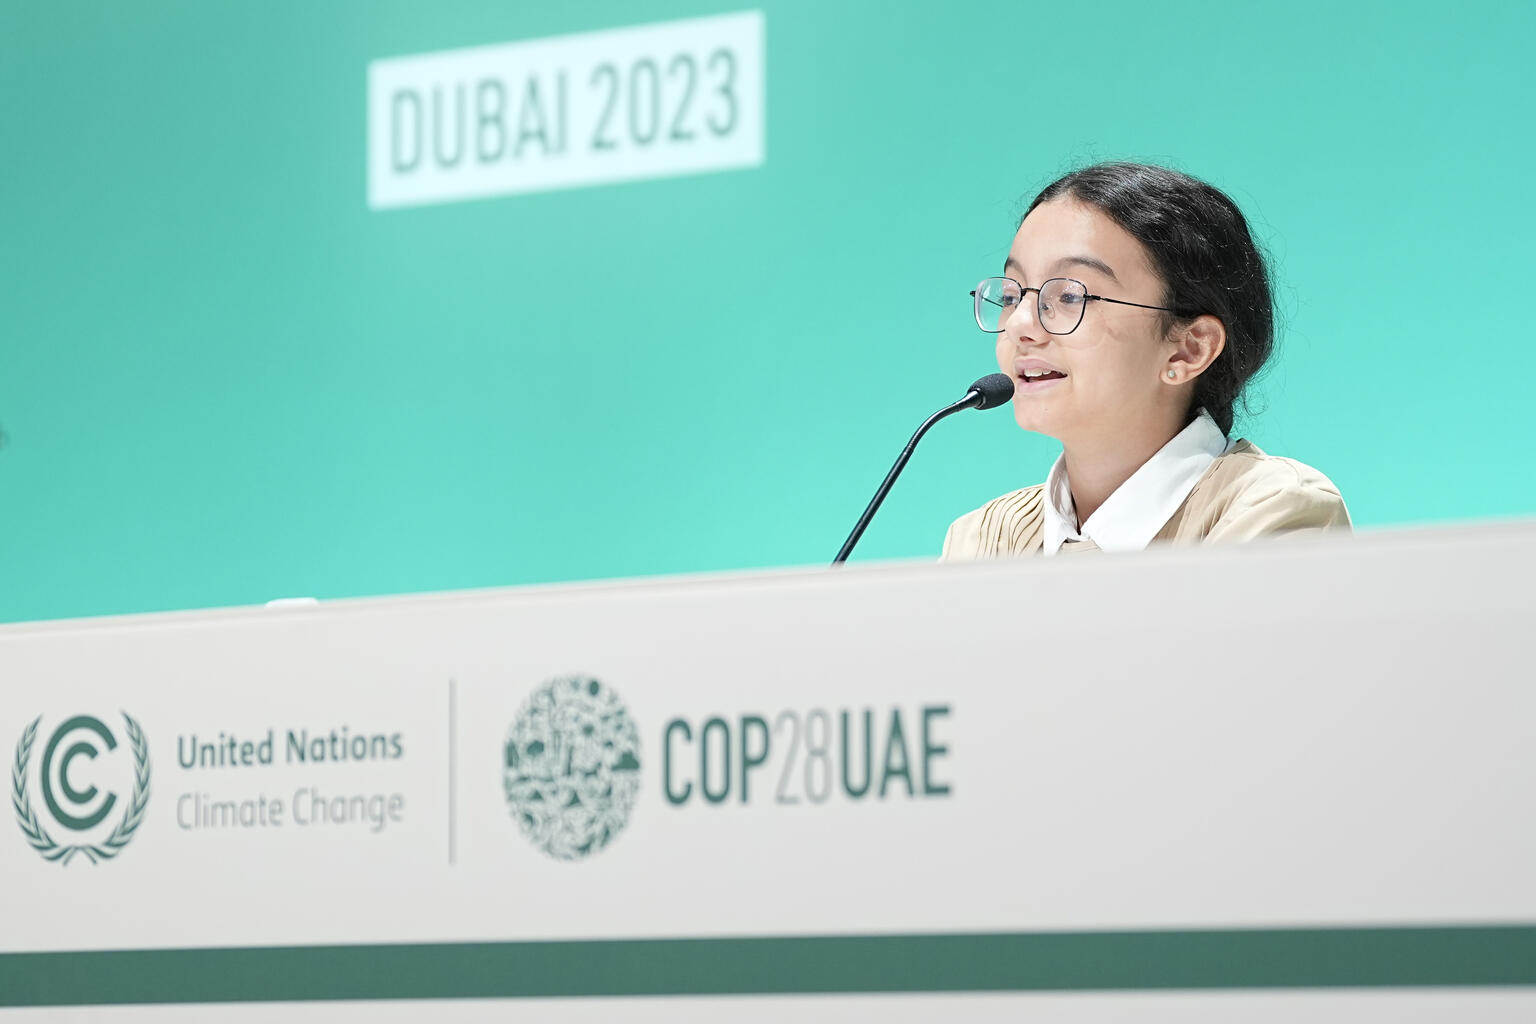 On 6 December 2023, Revan Ahmed, 13-year-old UNICEF Youth Advocate from Libya, briefs press during the UN Climate Change Conference (COP28) at Expo City Dubai in United Arab Emirates.